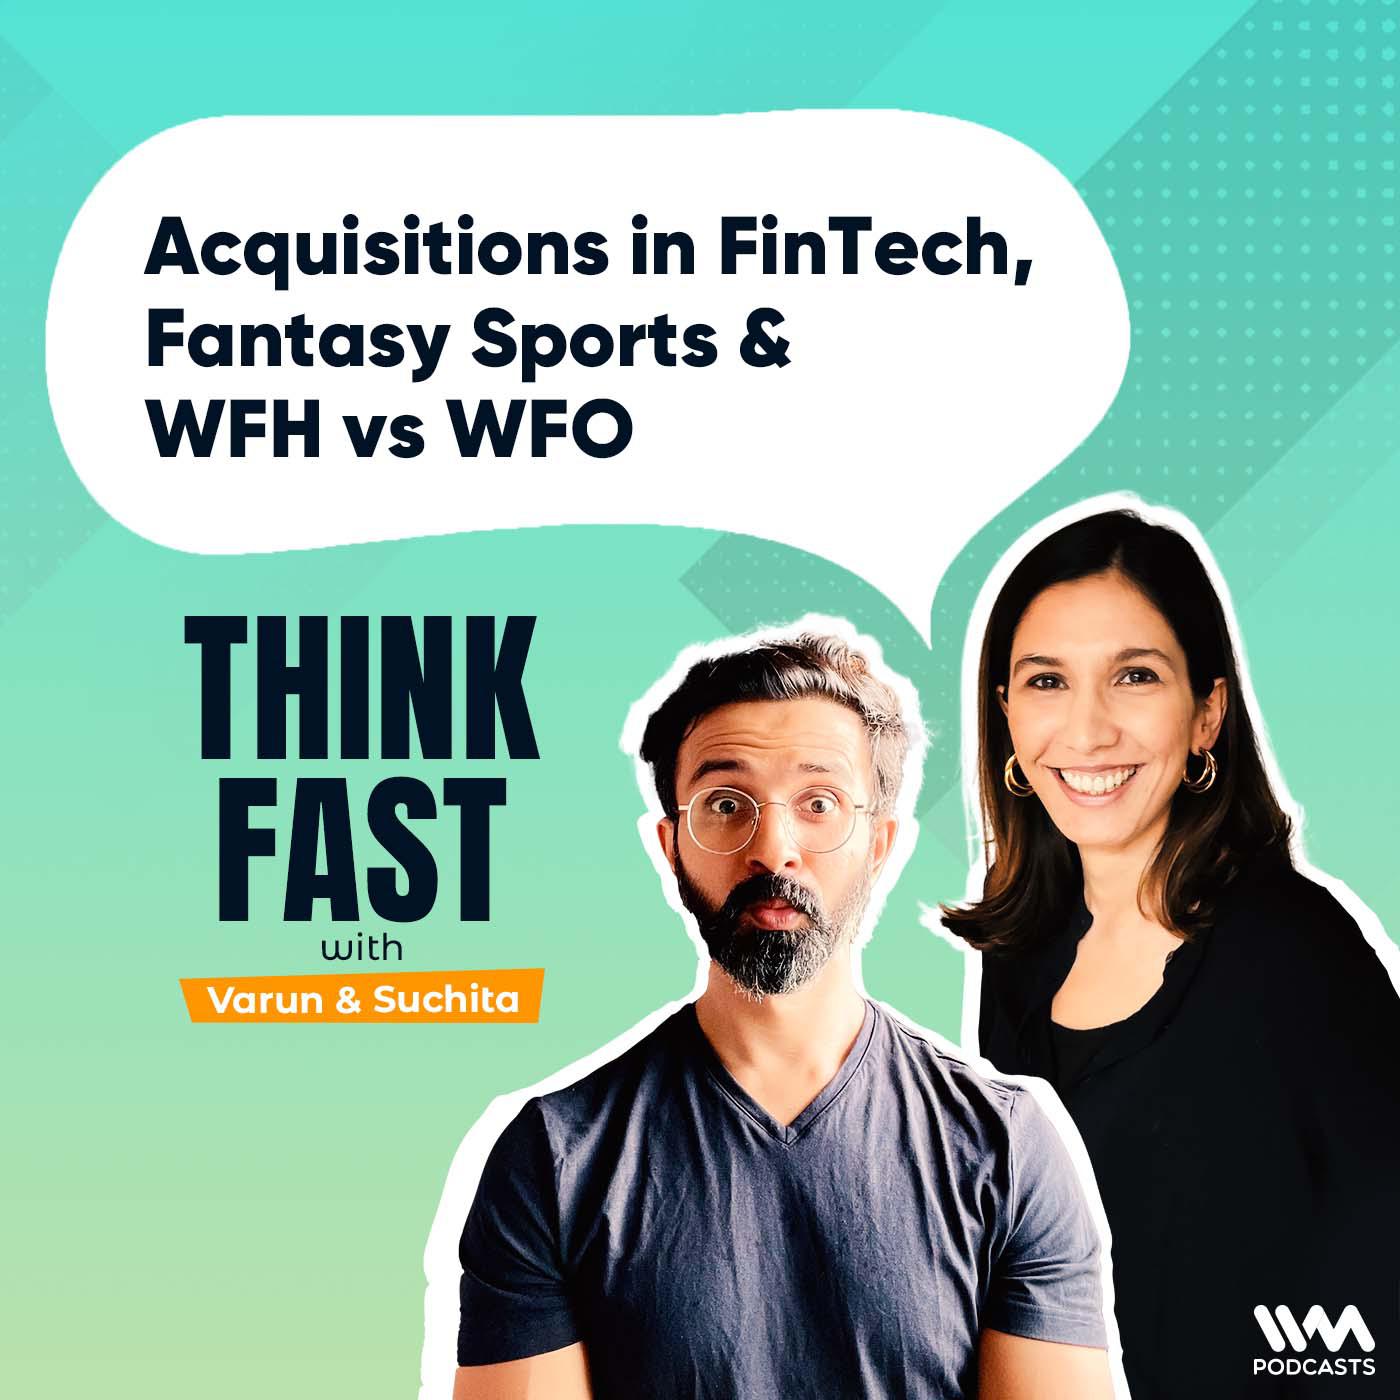 Acquisitions in FinTech, Fantasy Sports & WFH vs WFO